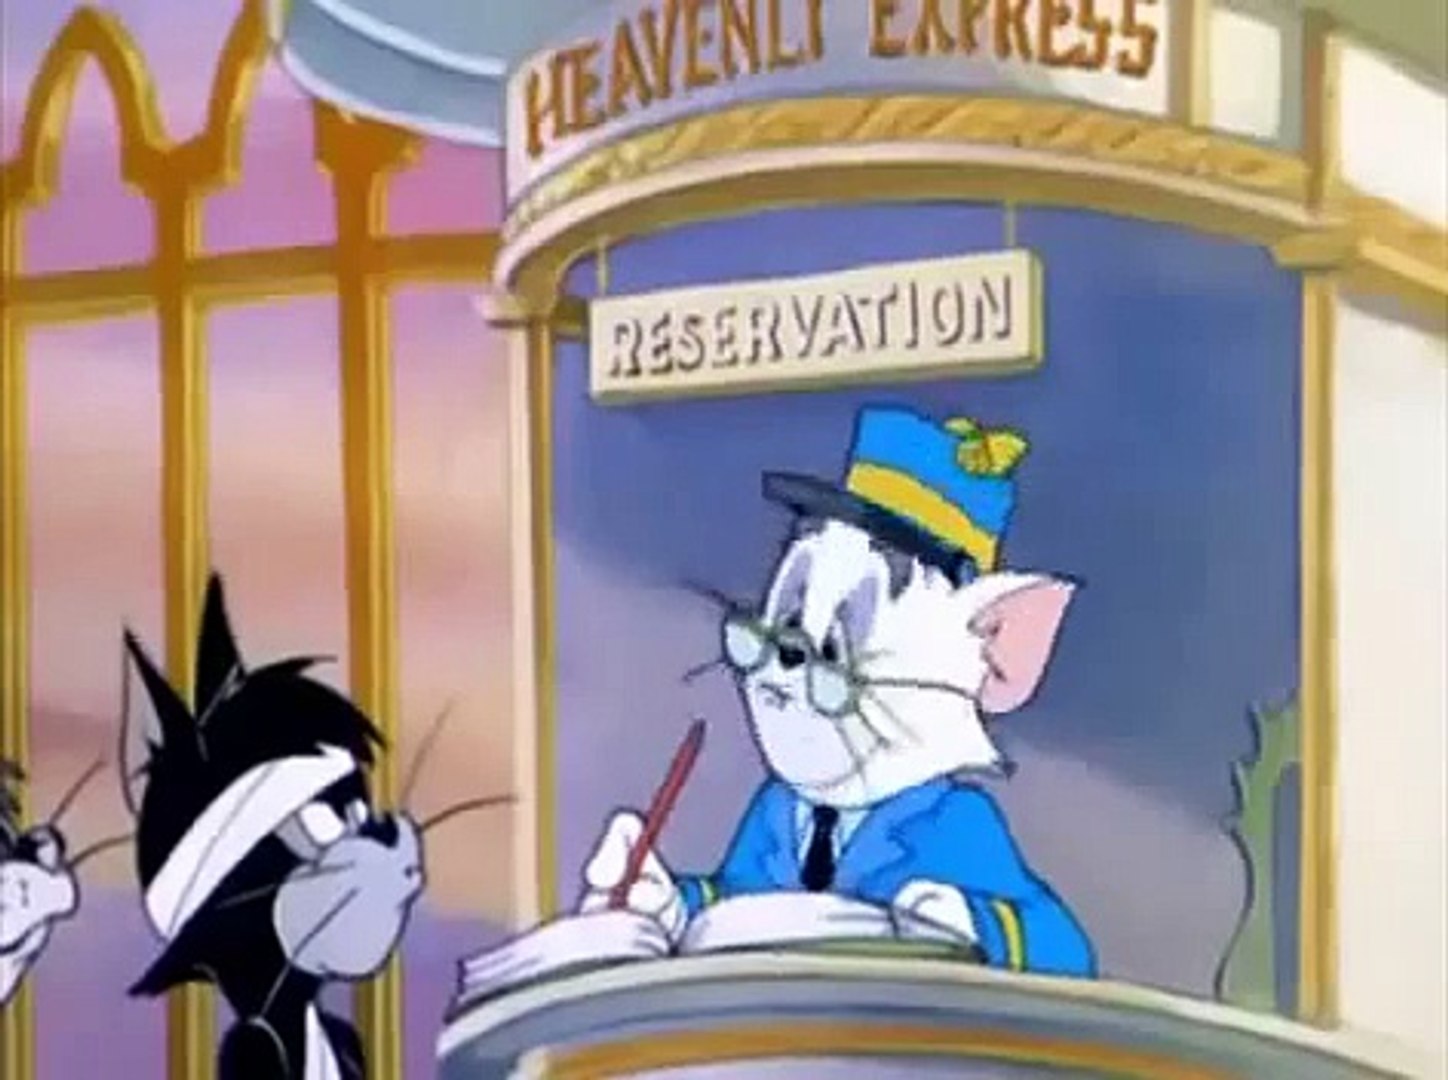 Best Animation Tom and jerry anime +++ Tom and jerry film cartoon Part 21